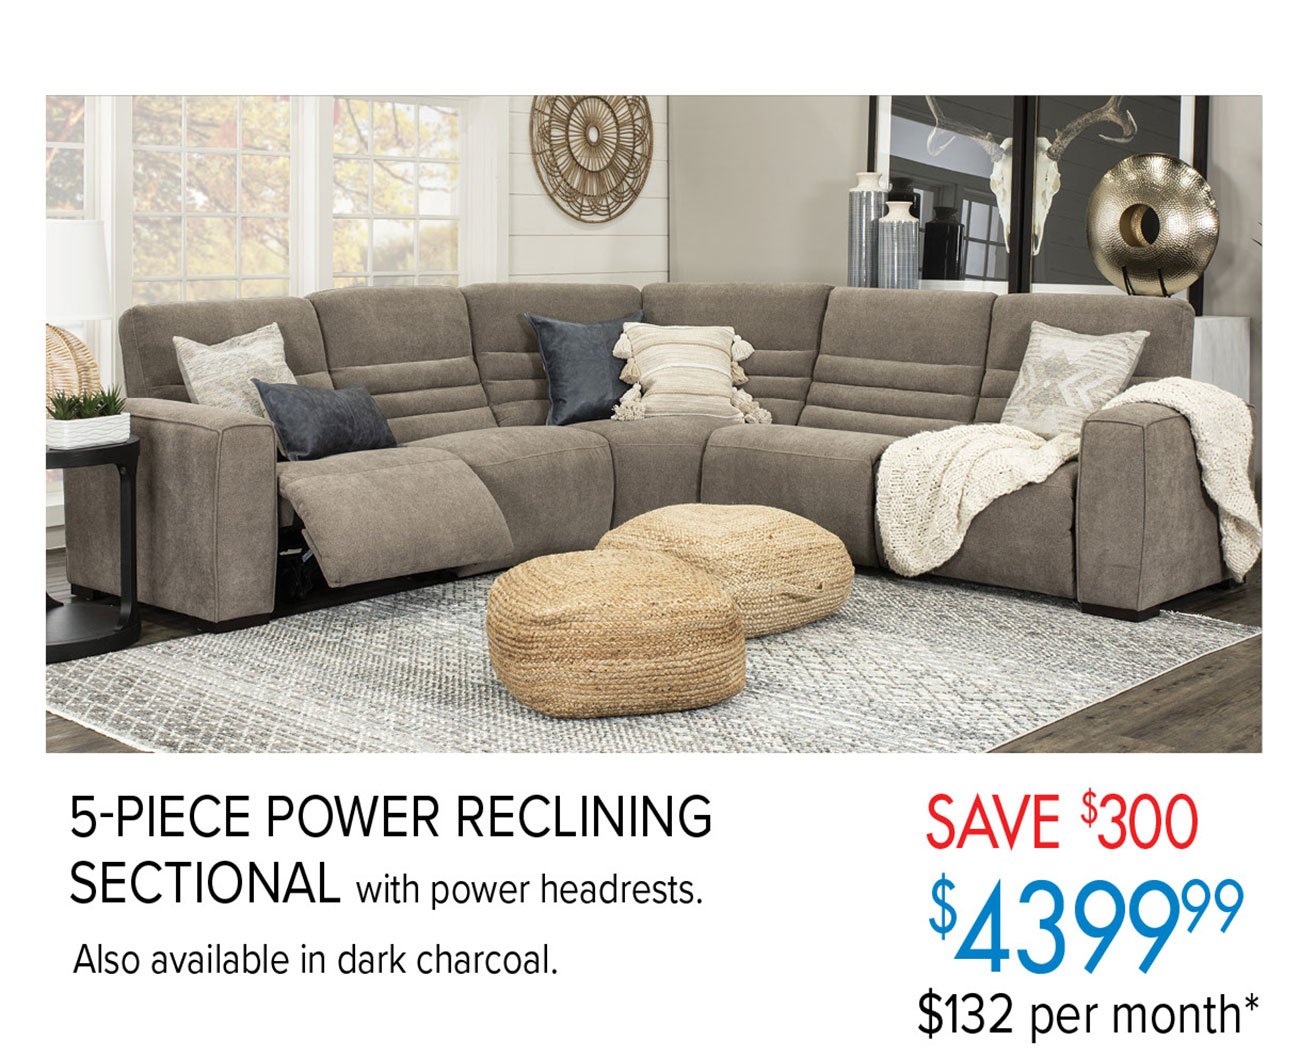  WA Wi 5-PIECE POWER RECLINING SECTIONAL with power headrests. $ 4 3 9999 Also available in dark charcoal. $132 per month* 